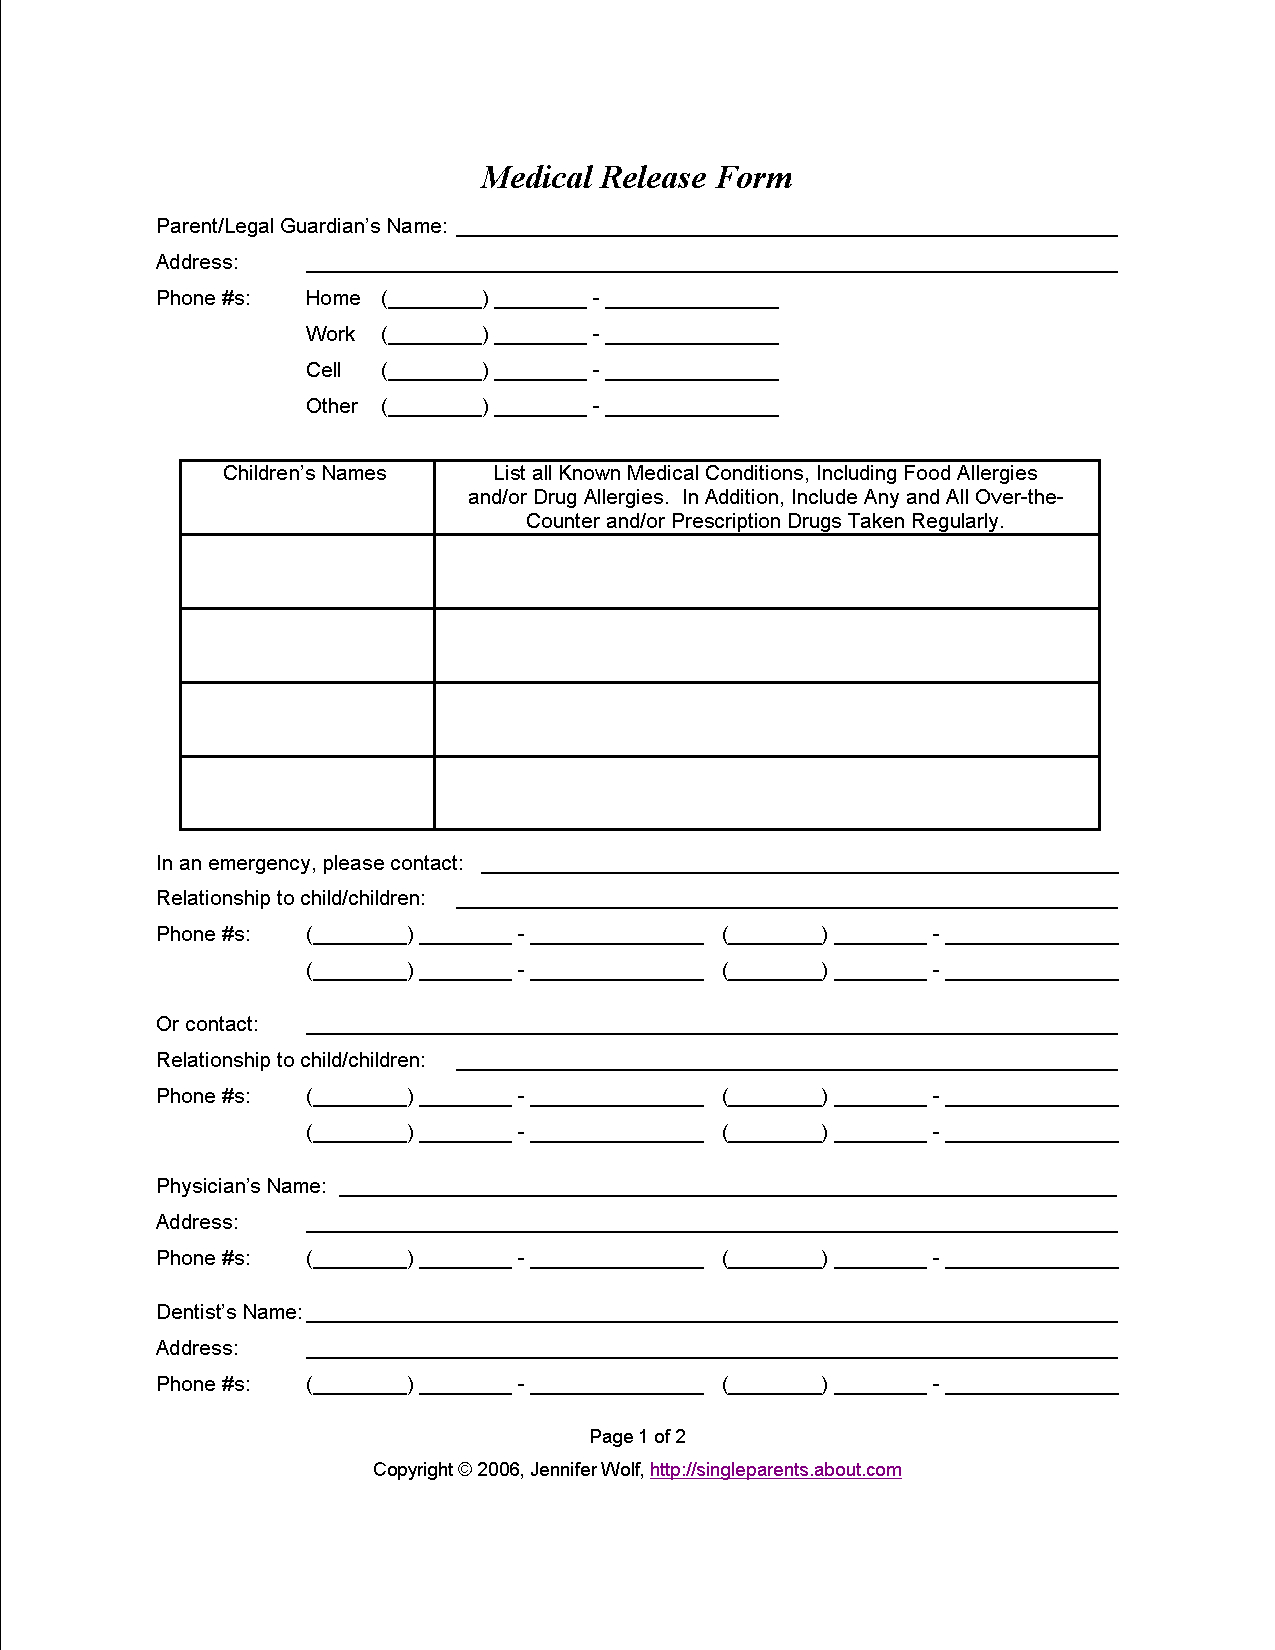 Do You Have A Medical Release Form For Your Kids? | Travel | Medical - Free Printable Caregiver Forms